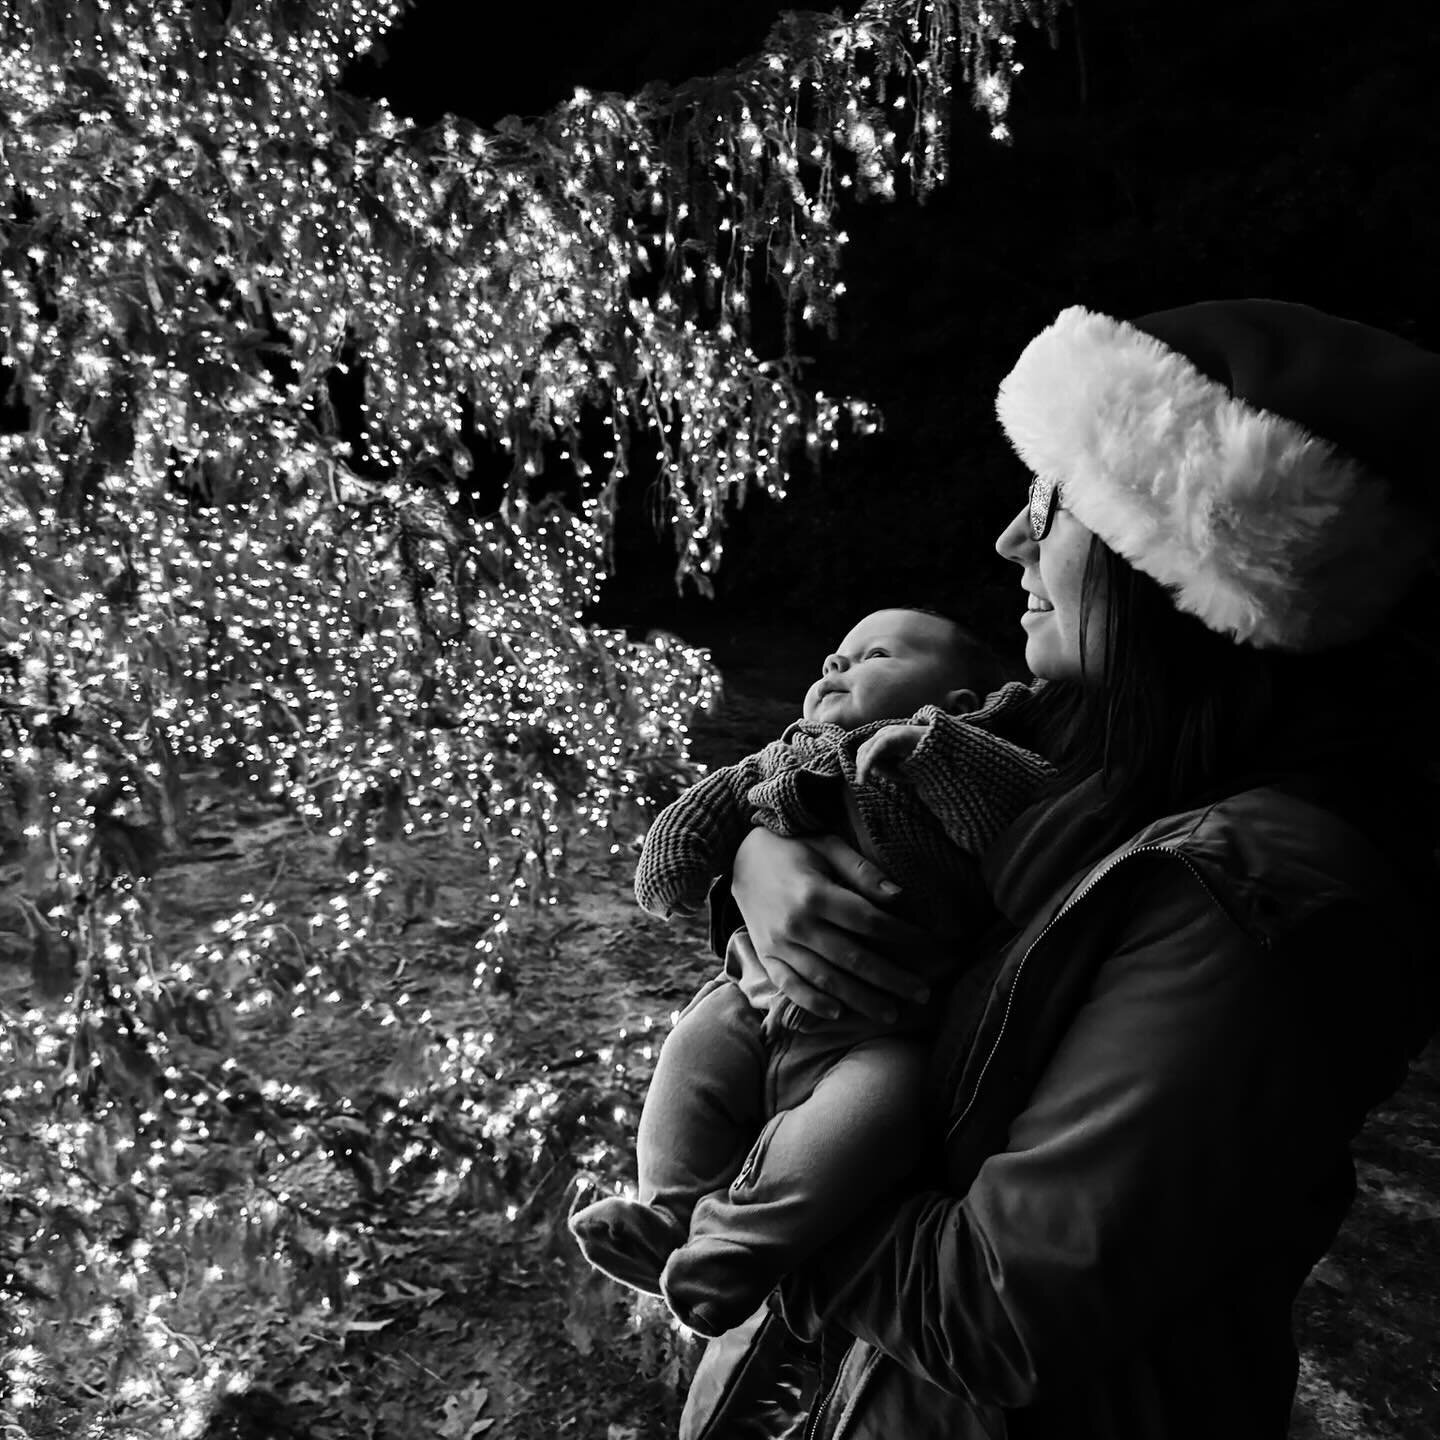 This first Christmas with Grayson was so magical and full of love. Getting to see the festivities through his eyes was beautiful and really made me appreciate all the small details that make the season bright ❤️